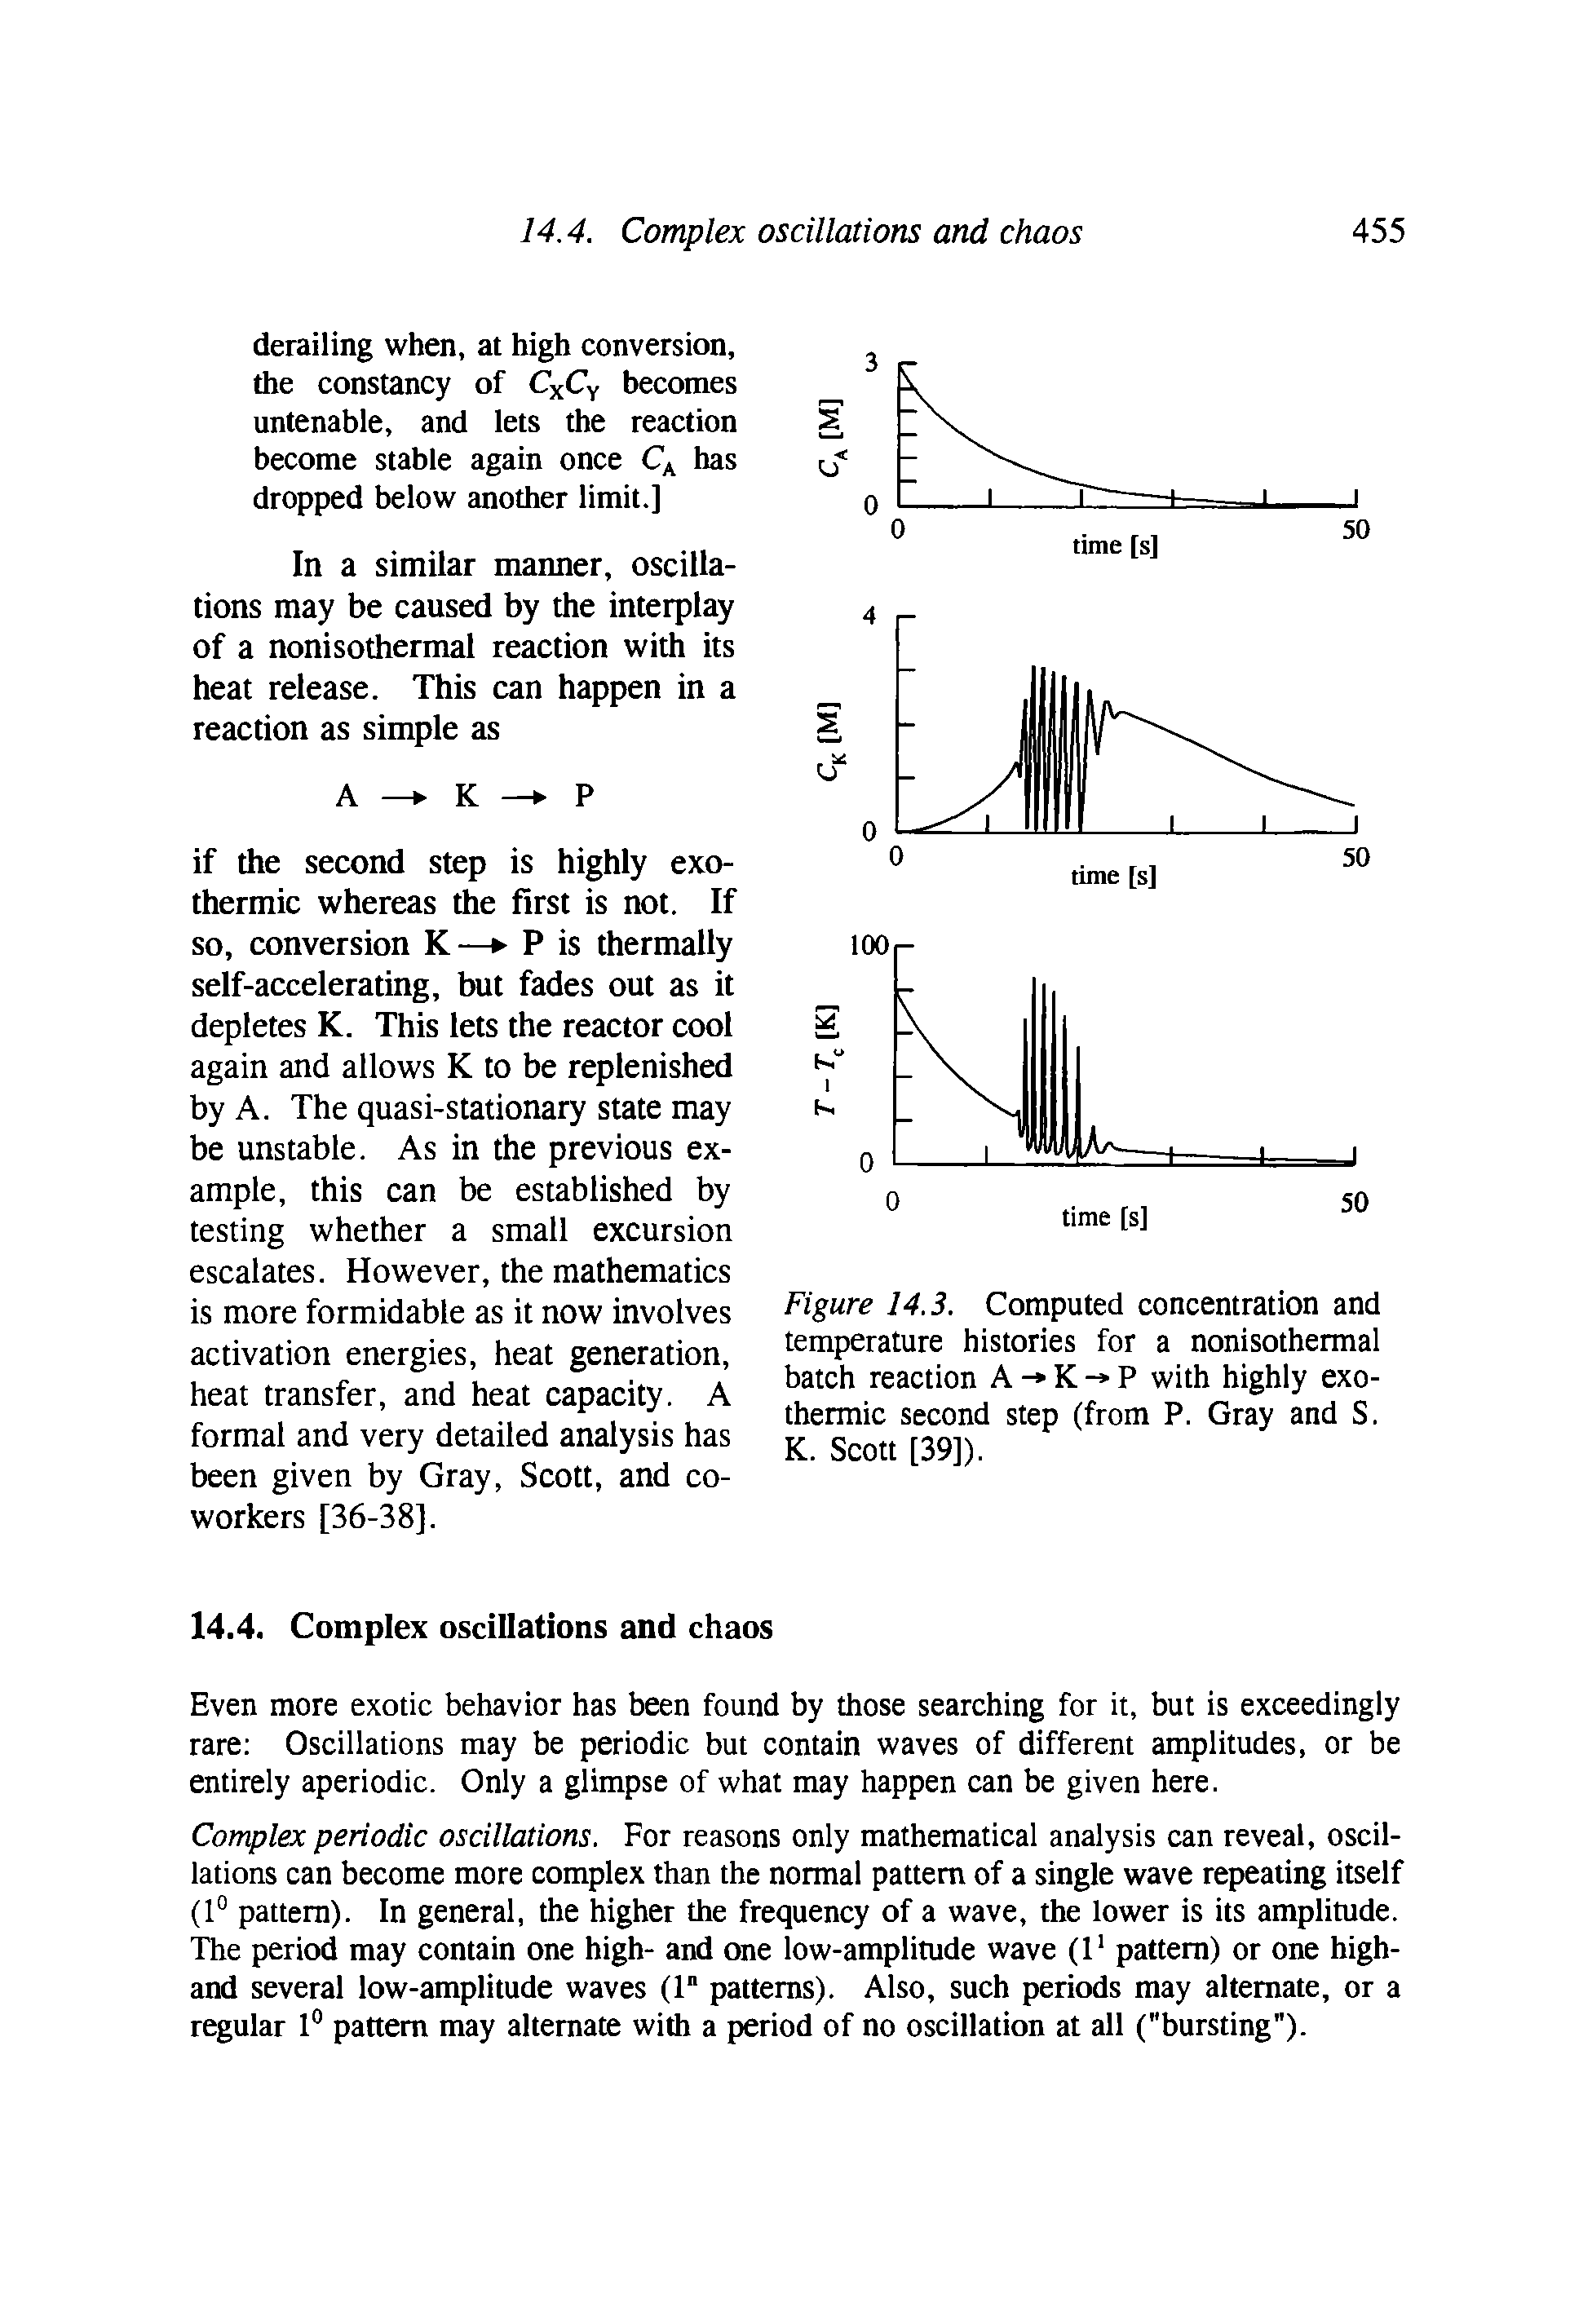 Figure 14.3. Computed concentration and temperature histories for a nonisothermal batch reaction A - K - P with highly exothermic second step (from P. Gray and S. K. Scott [39]).